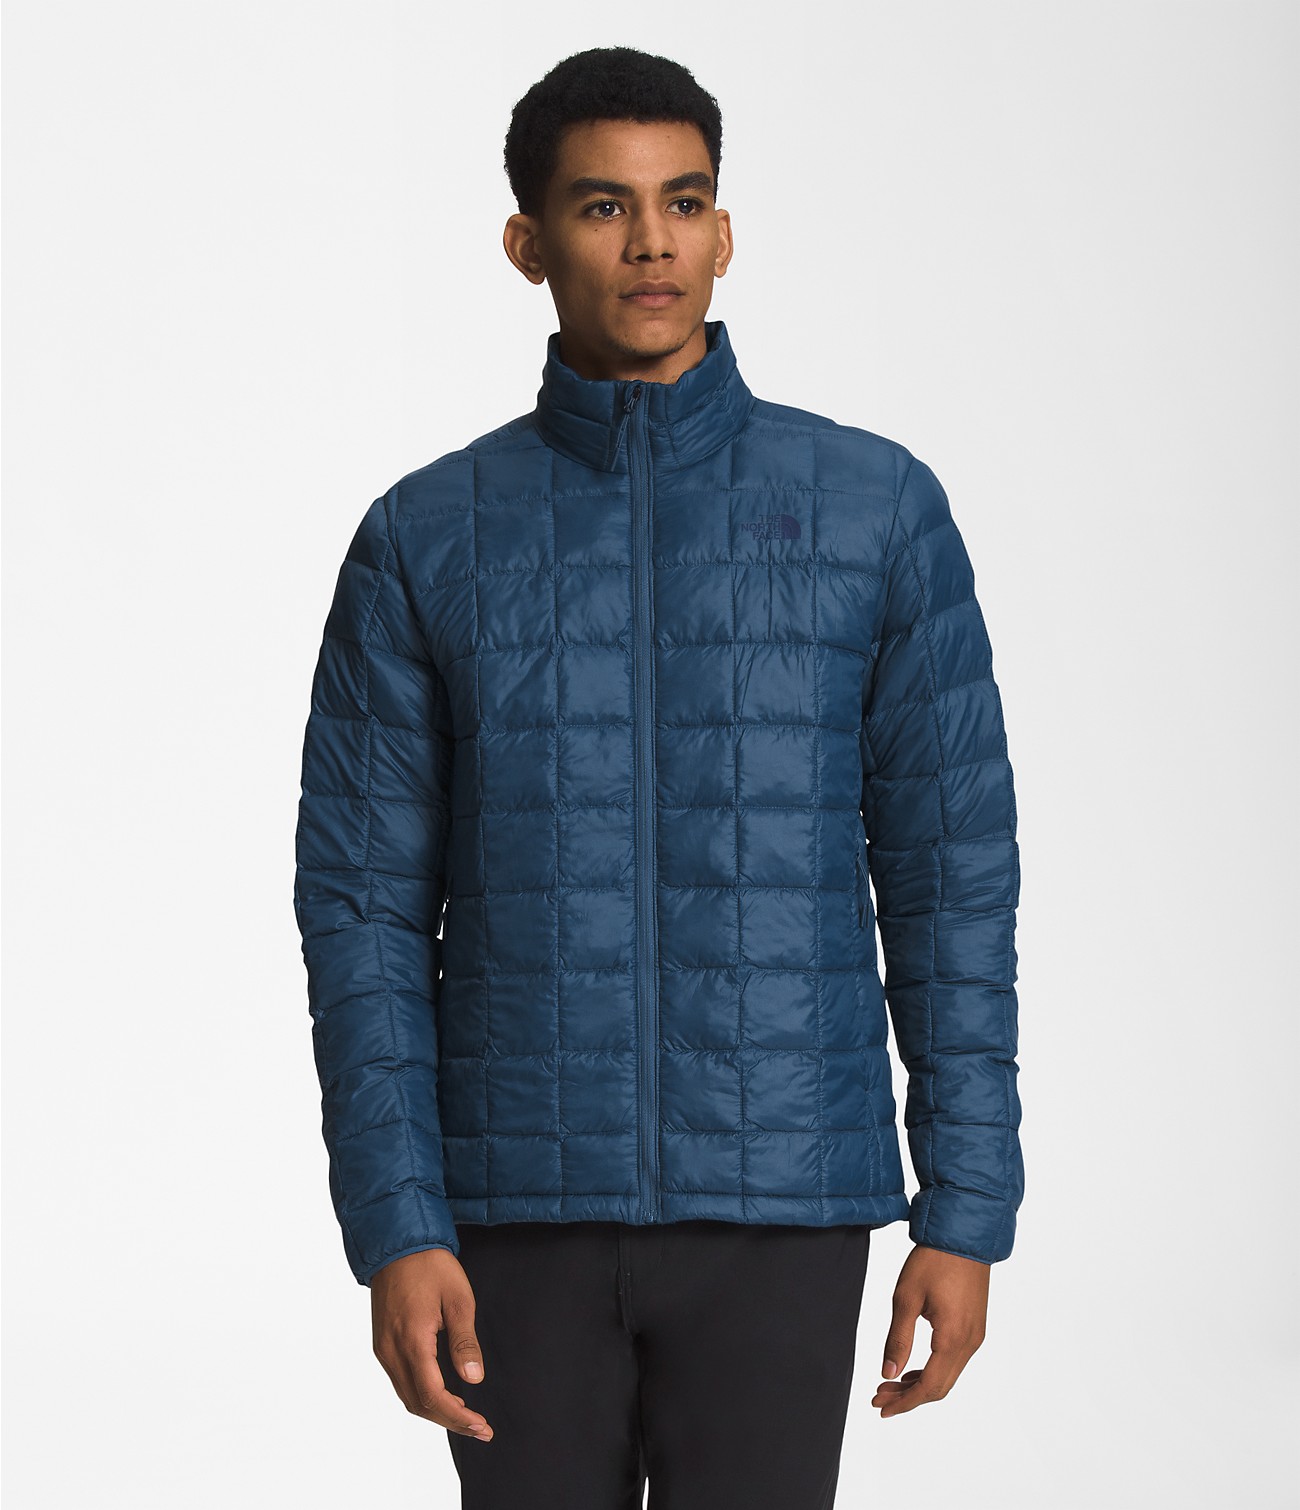 Unlock Wilderness' choice in the Carhartt Vs North Face comparison, the ThermoBall™ Eco Jacket 2.0 by The North Face